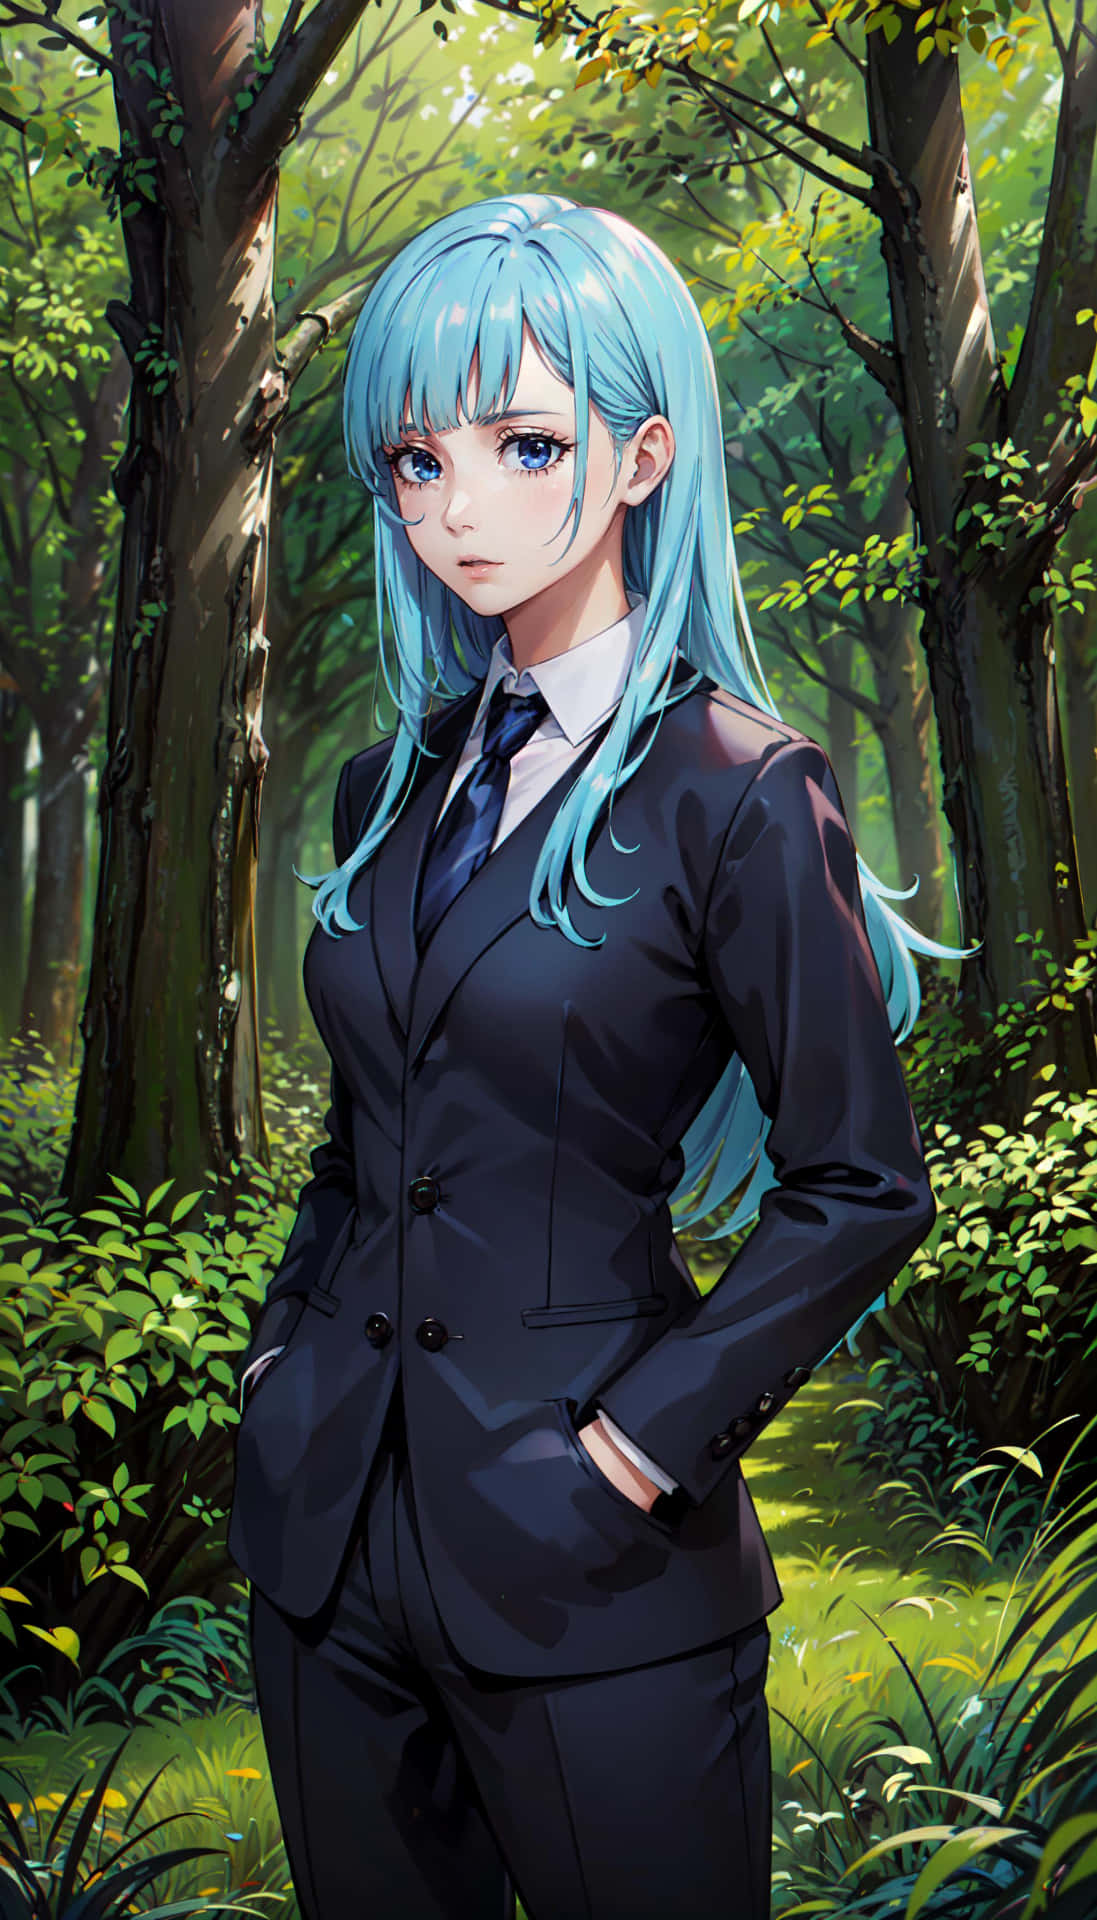 Blue Haired Anime Girlin Forest Suit Wallpaper